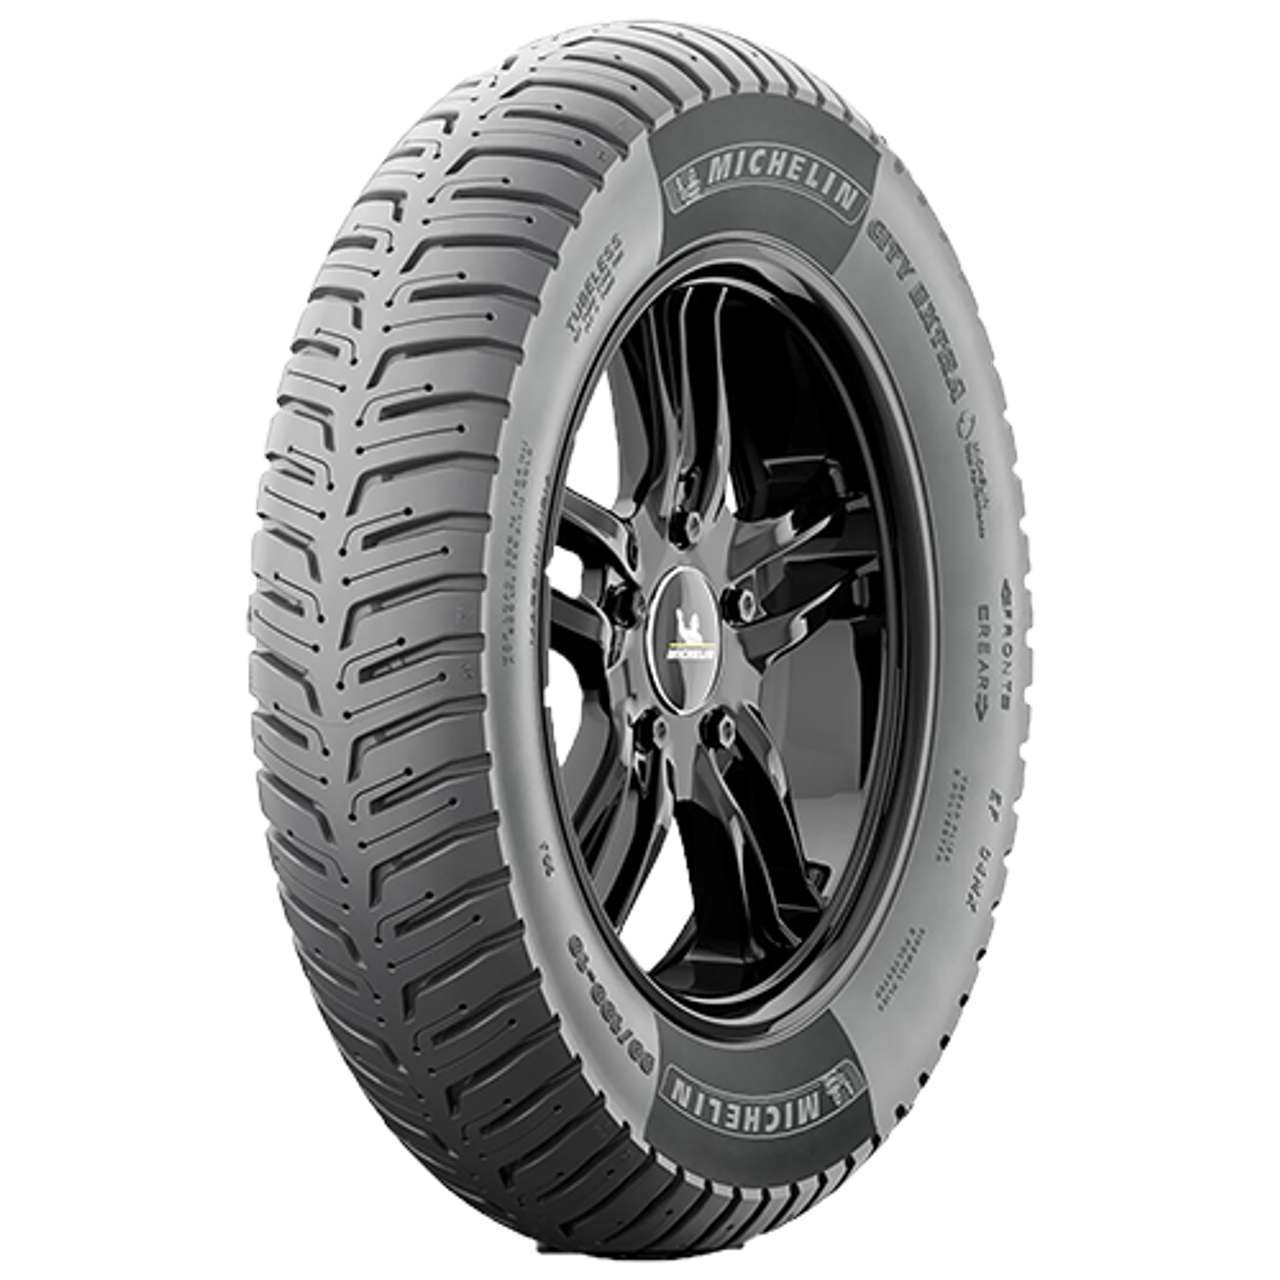 MICHELIN CITY EXTRA 80/90 - 17 M/C XL TL 50S FRONT/REAR